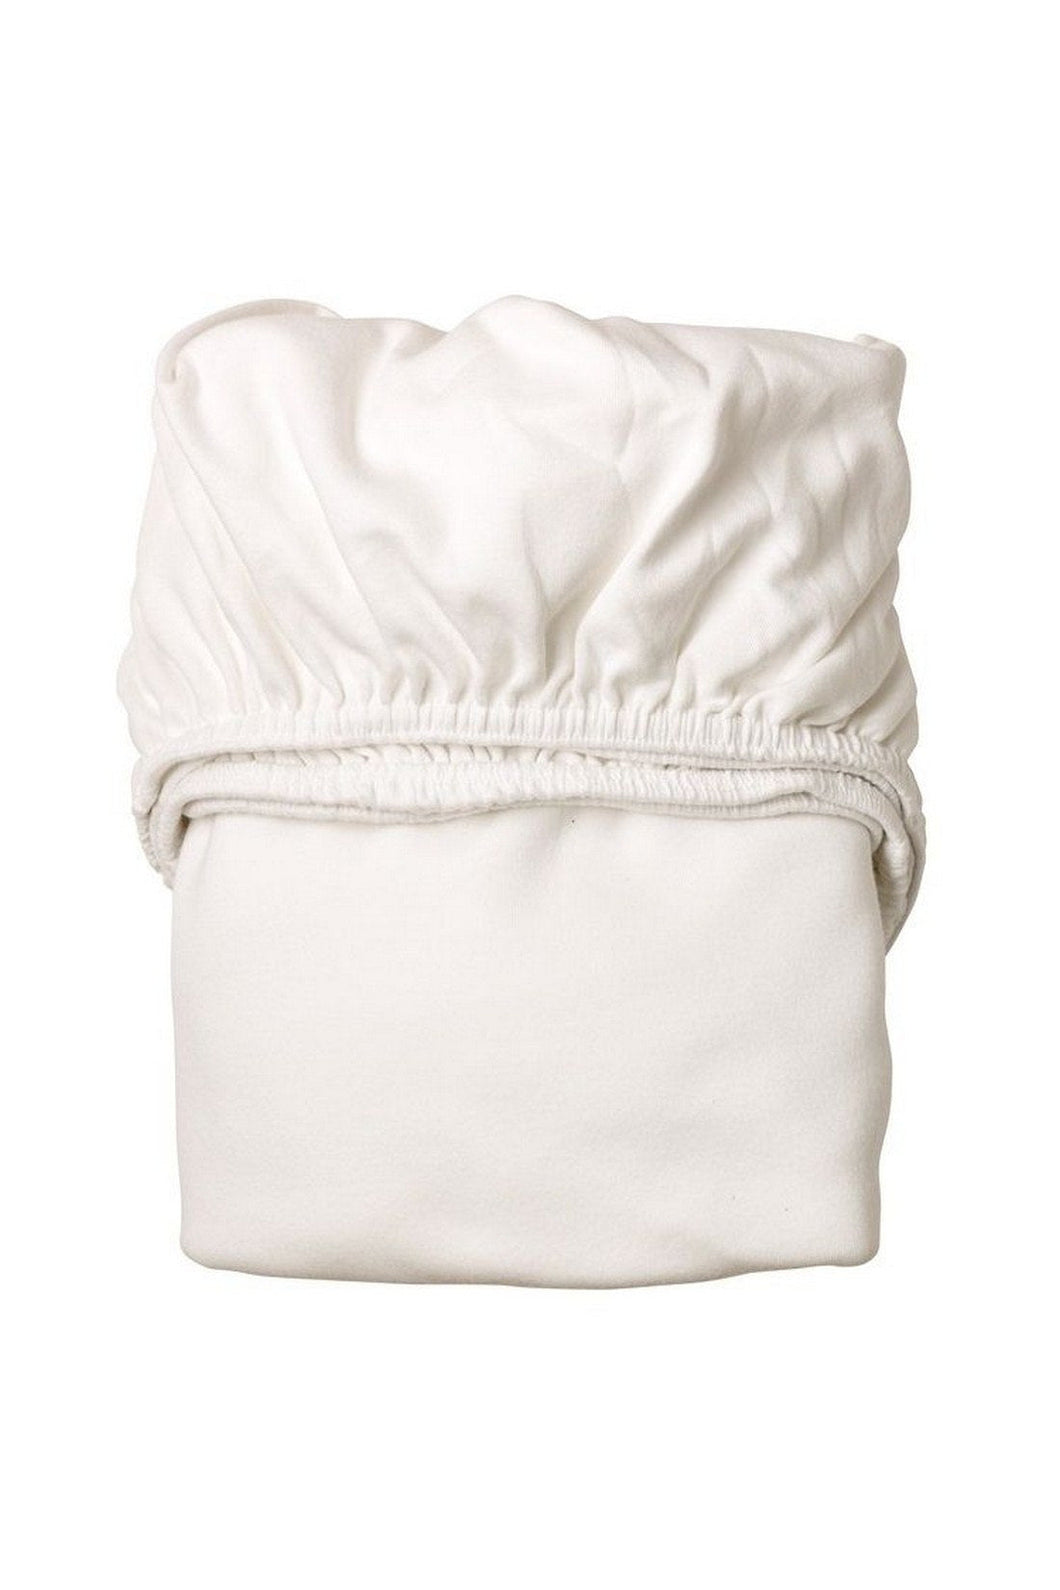 Leander Fitted Sheet For Baby Cot White 1